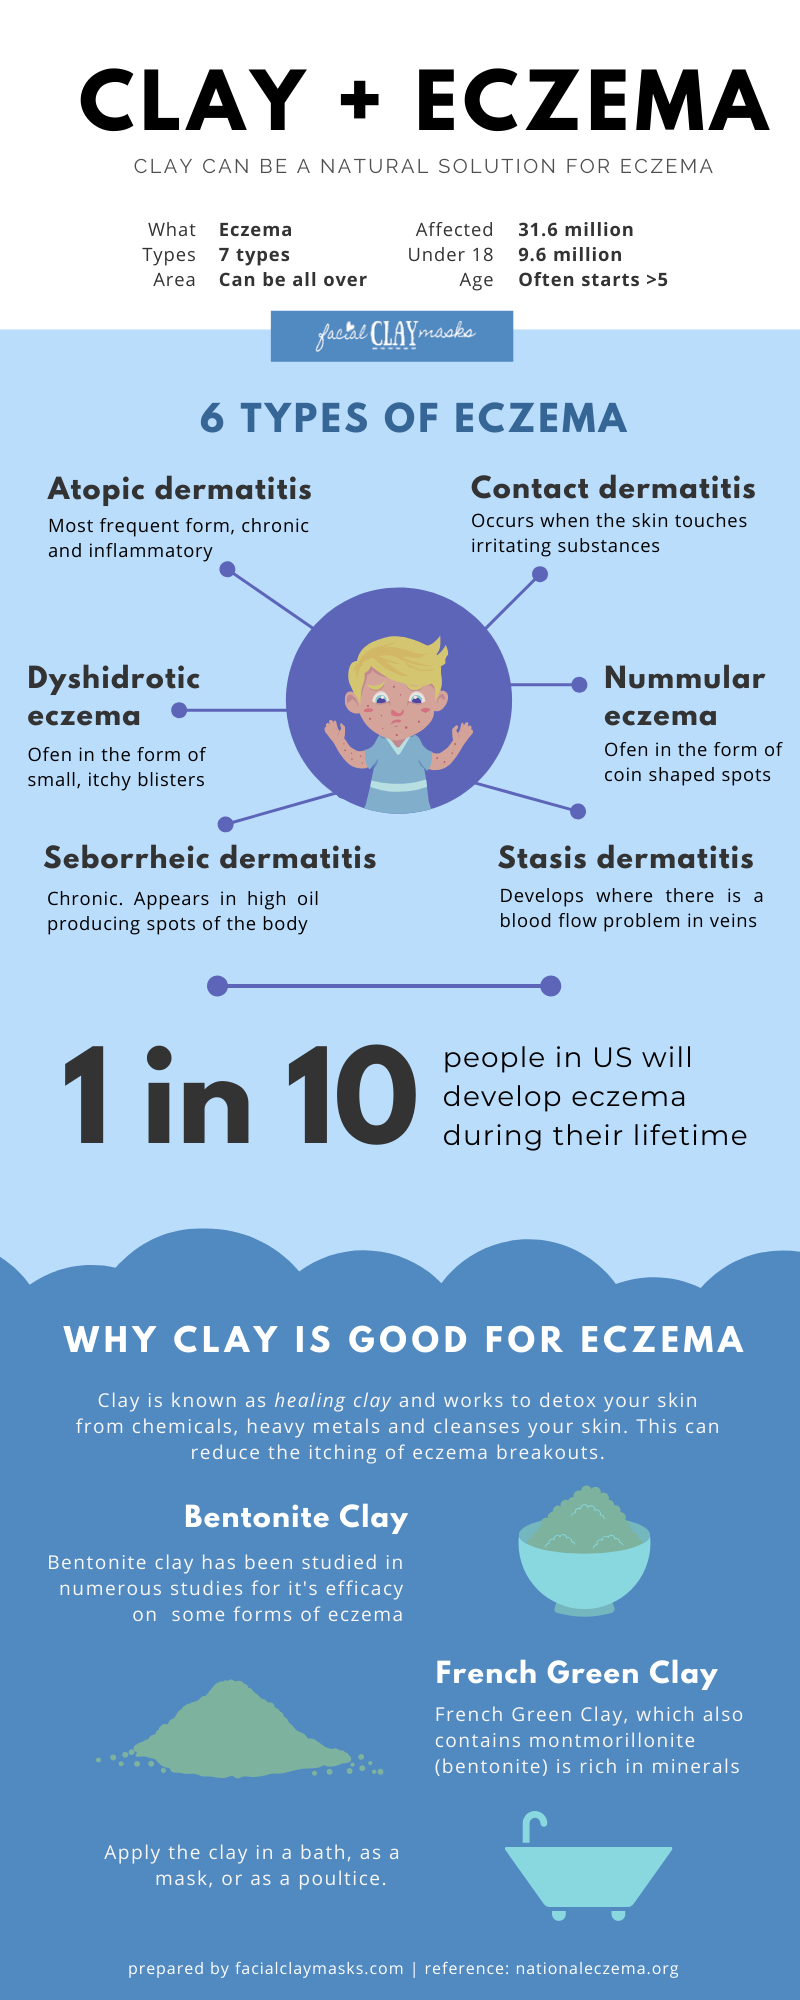 Are clay masks good for Eczema? 3